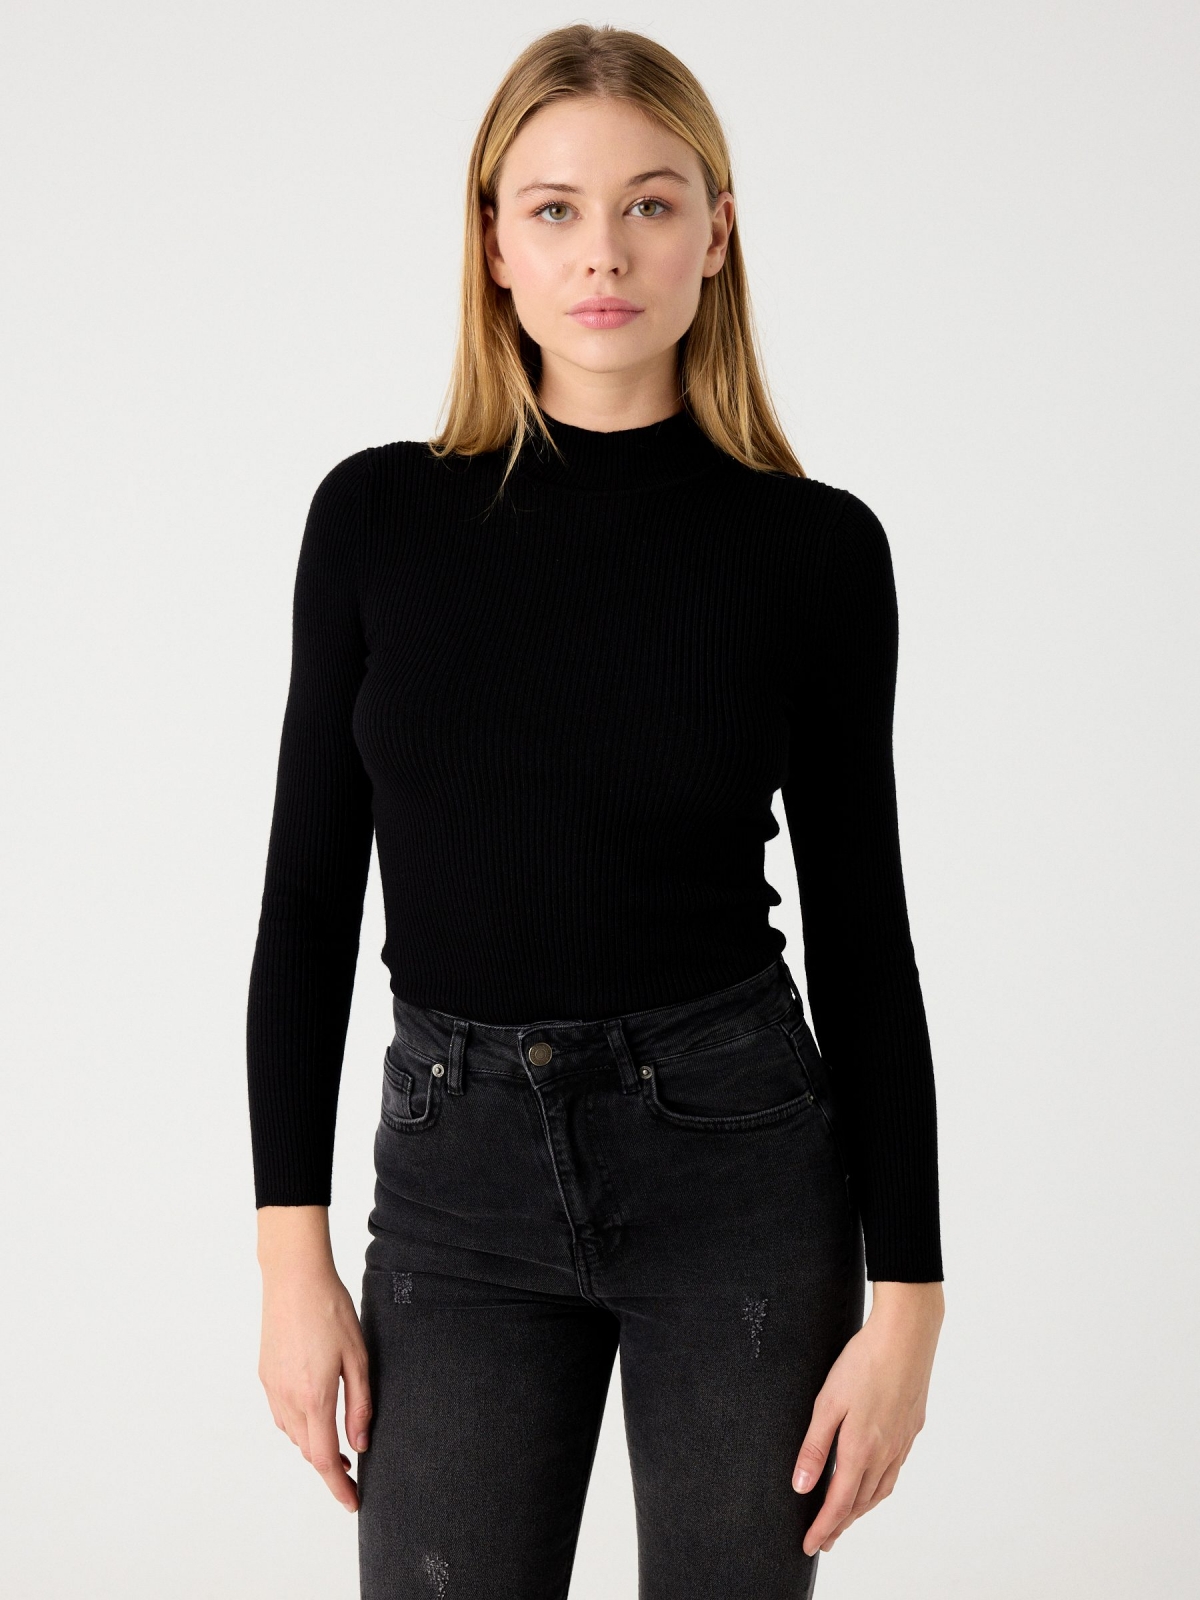 Black sweater with turtleneck